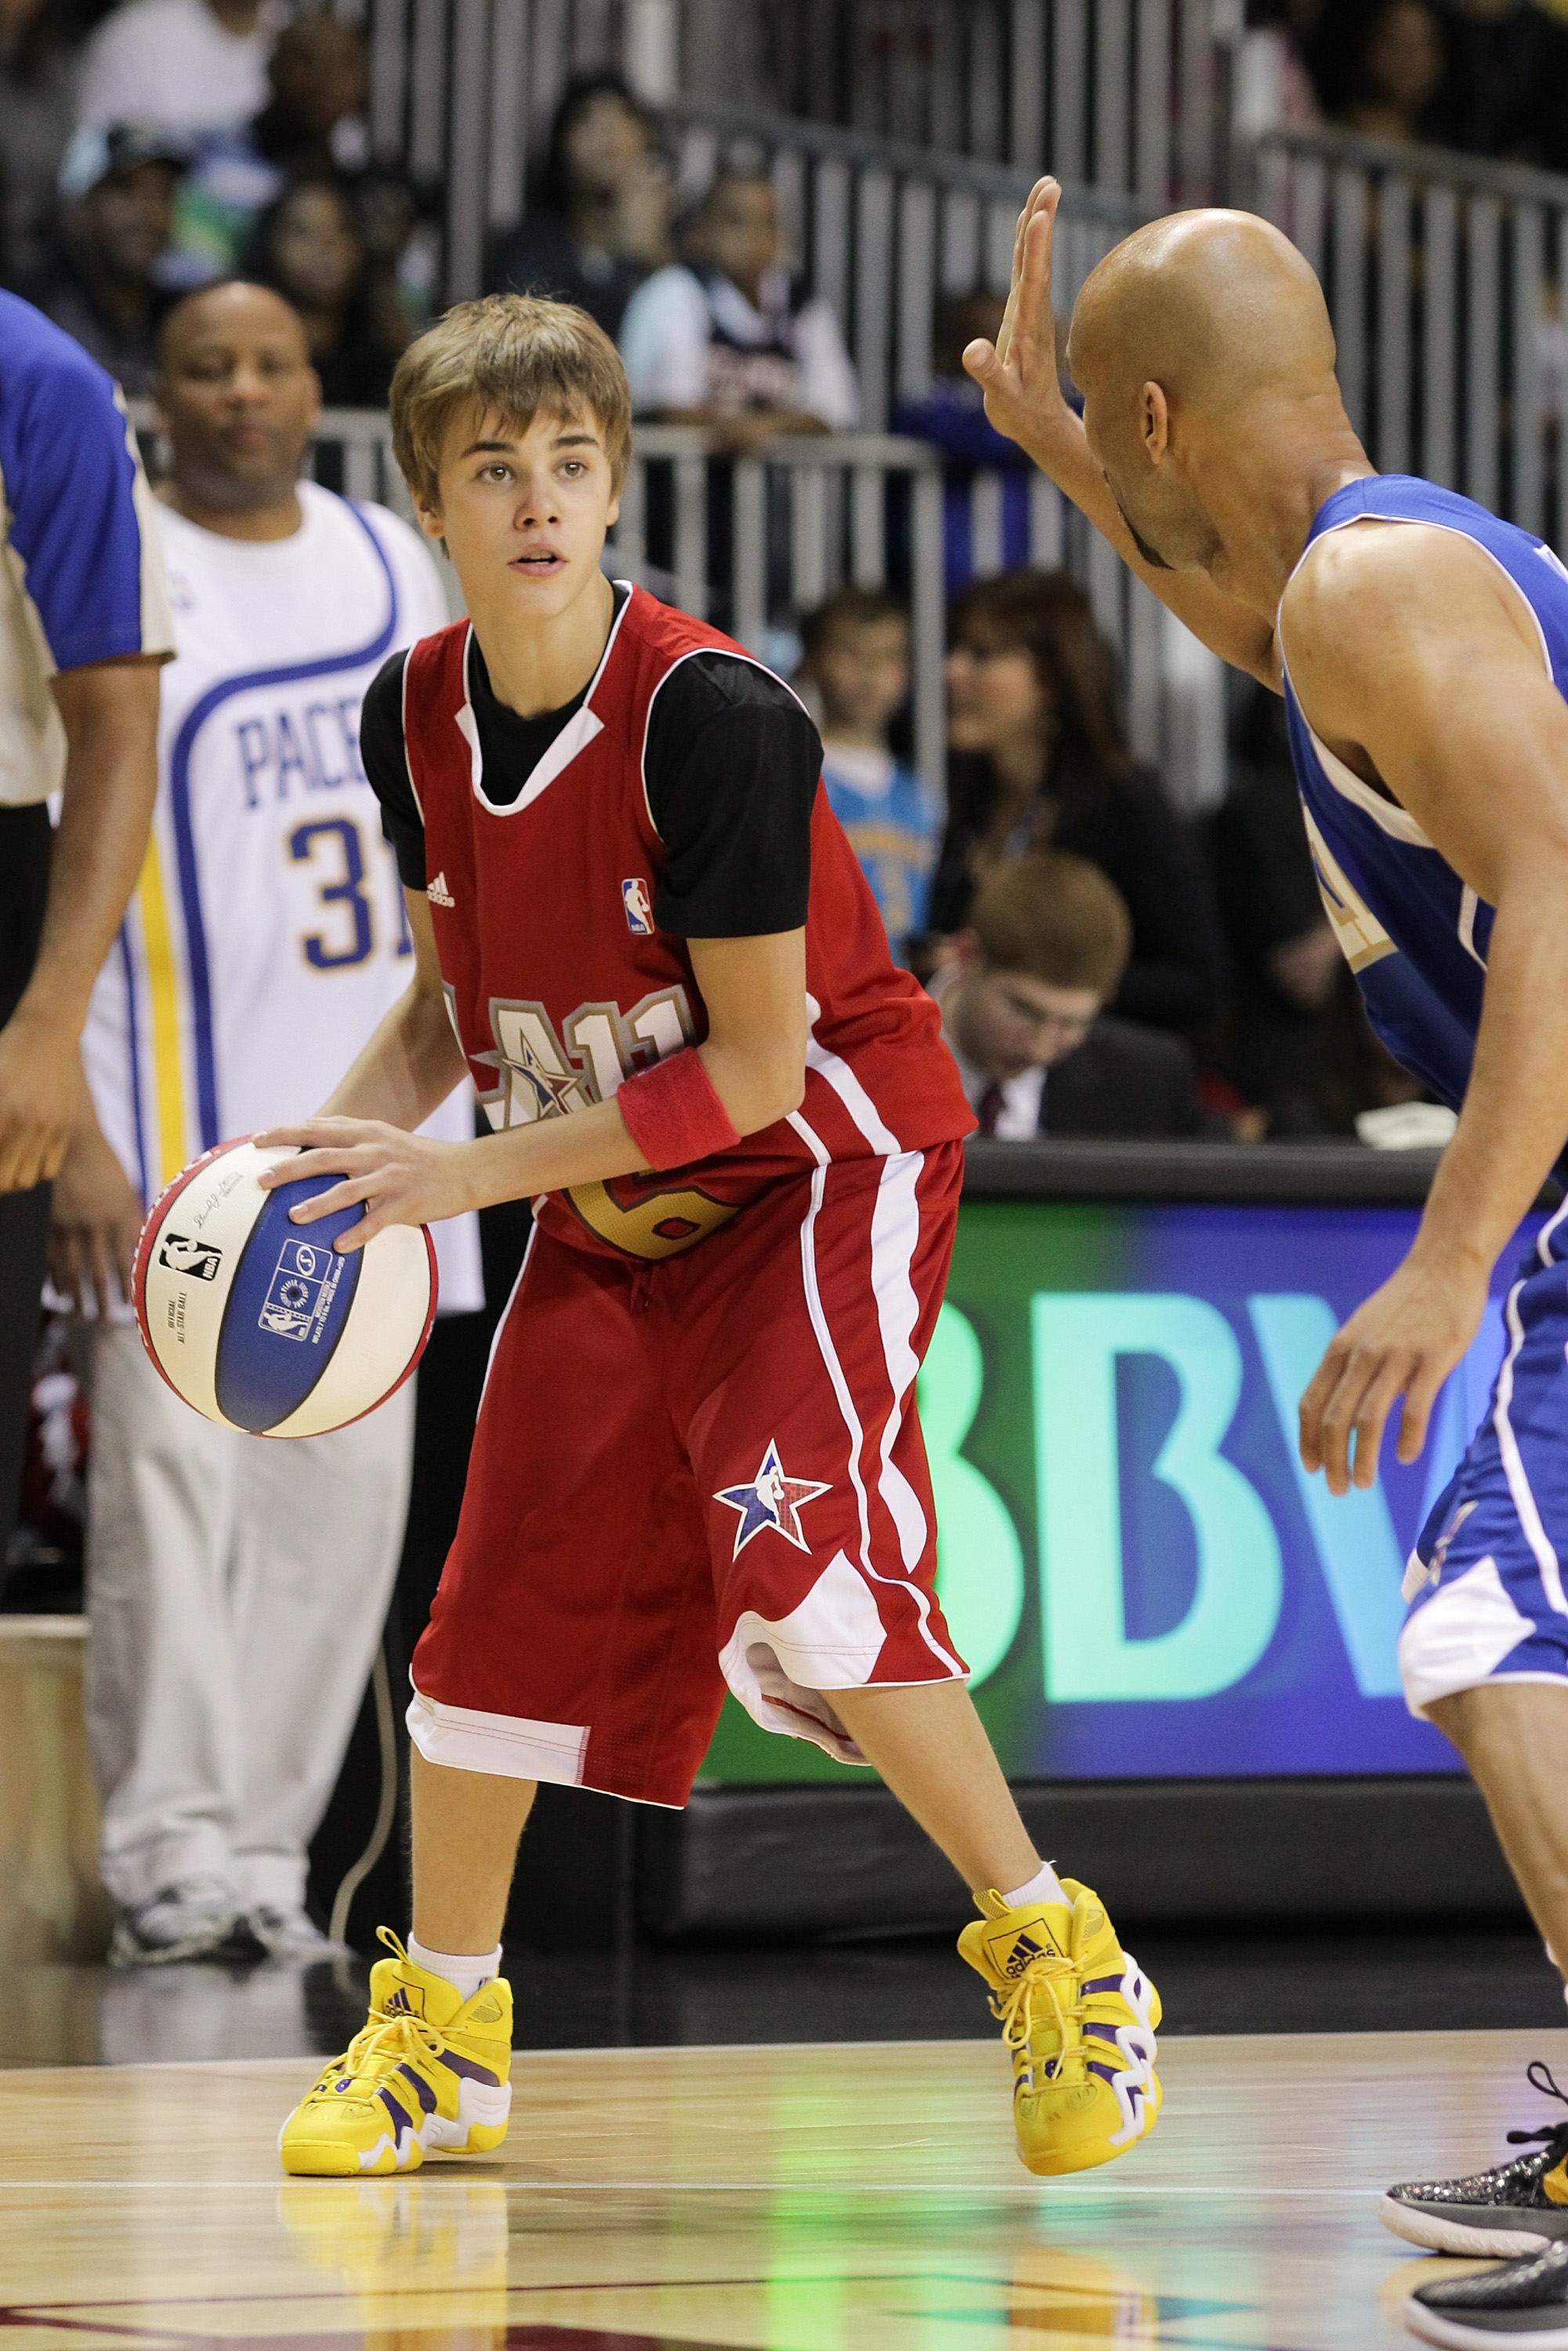 LOS ANGELES, CA - FEBRUARY 18:  Justin Bieber plays at the 2011 BBVA NBA All-Star Celebrity Game at the Los Angeles Convention Center on February 18, 2011 in Los Angeles, California.  (Photo by Noel Vasquez/Getty Images)